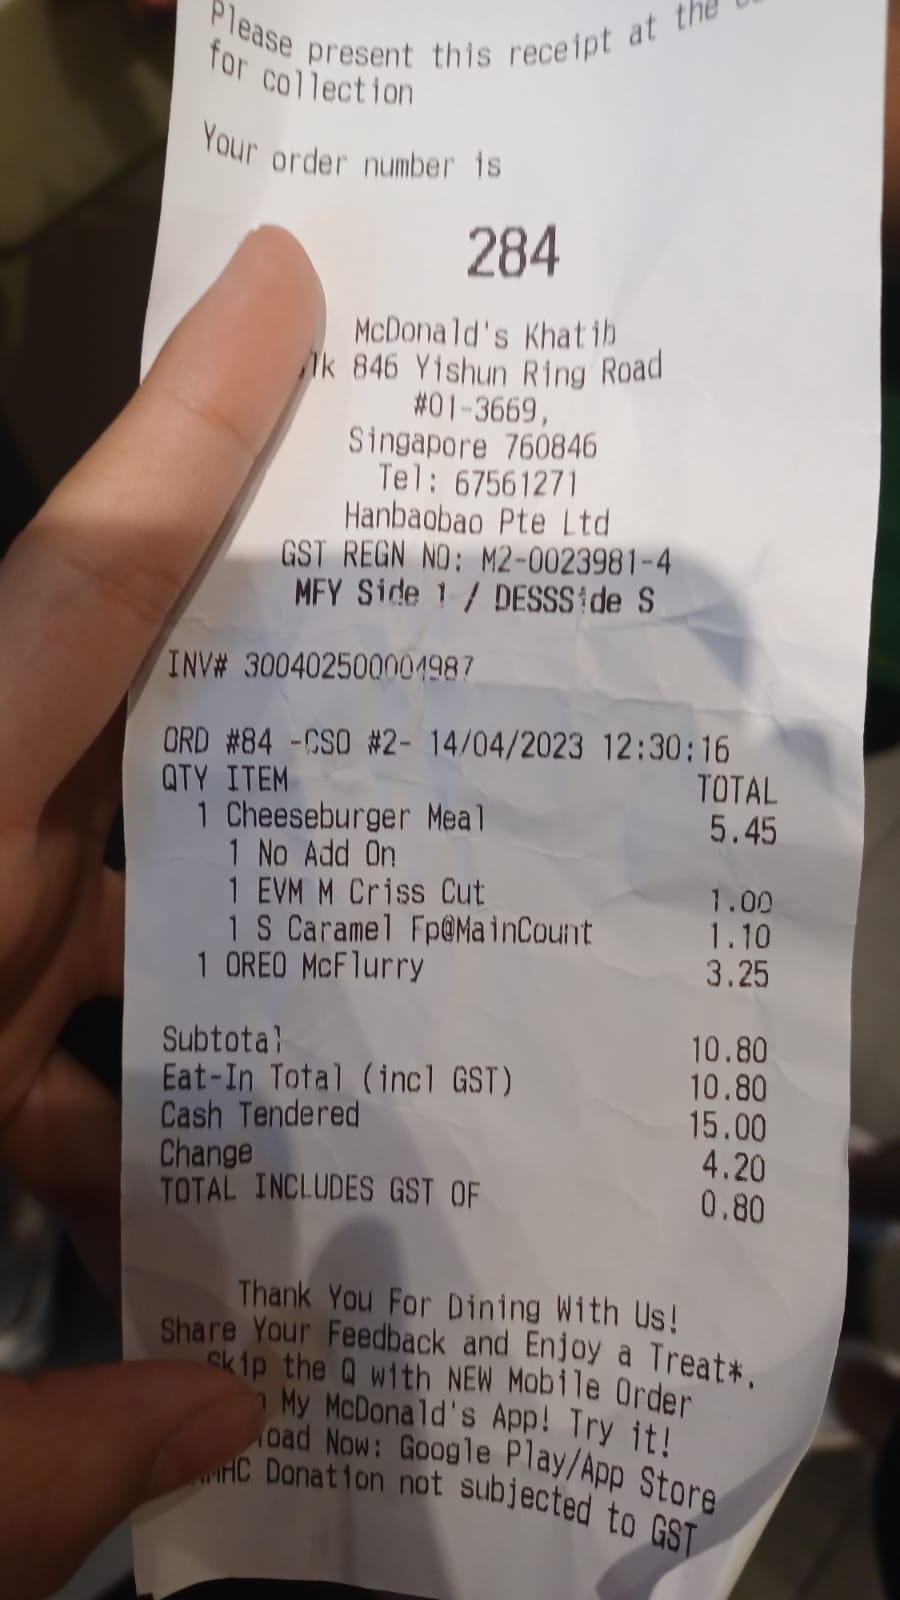 McDonald’s Khatib Customers Allegedly Wait 1.5 Hours To Receive Order ...